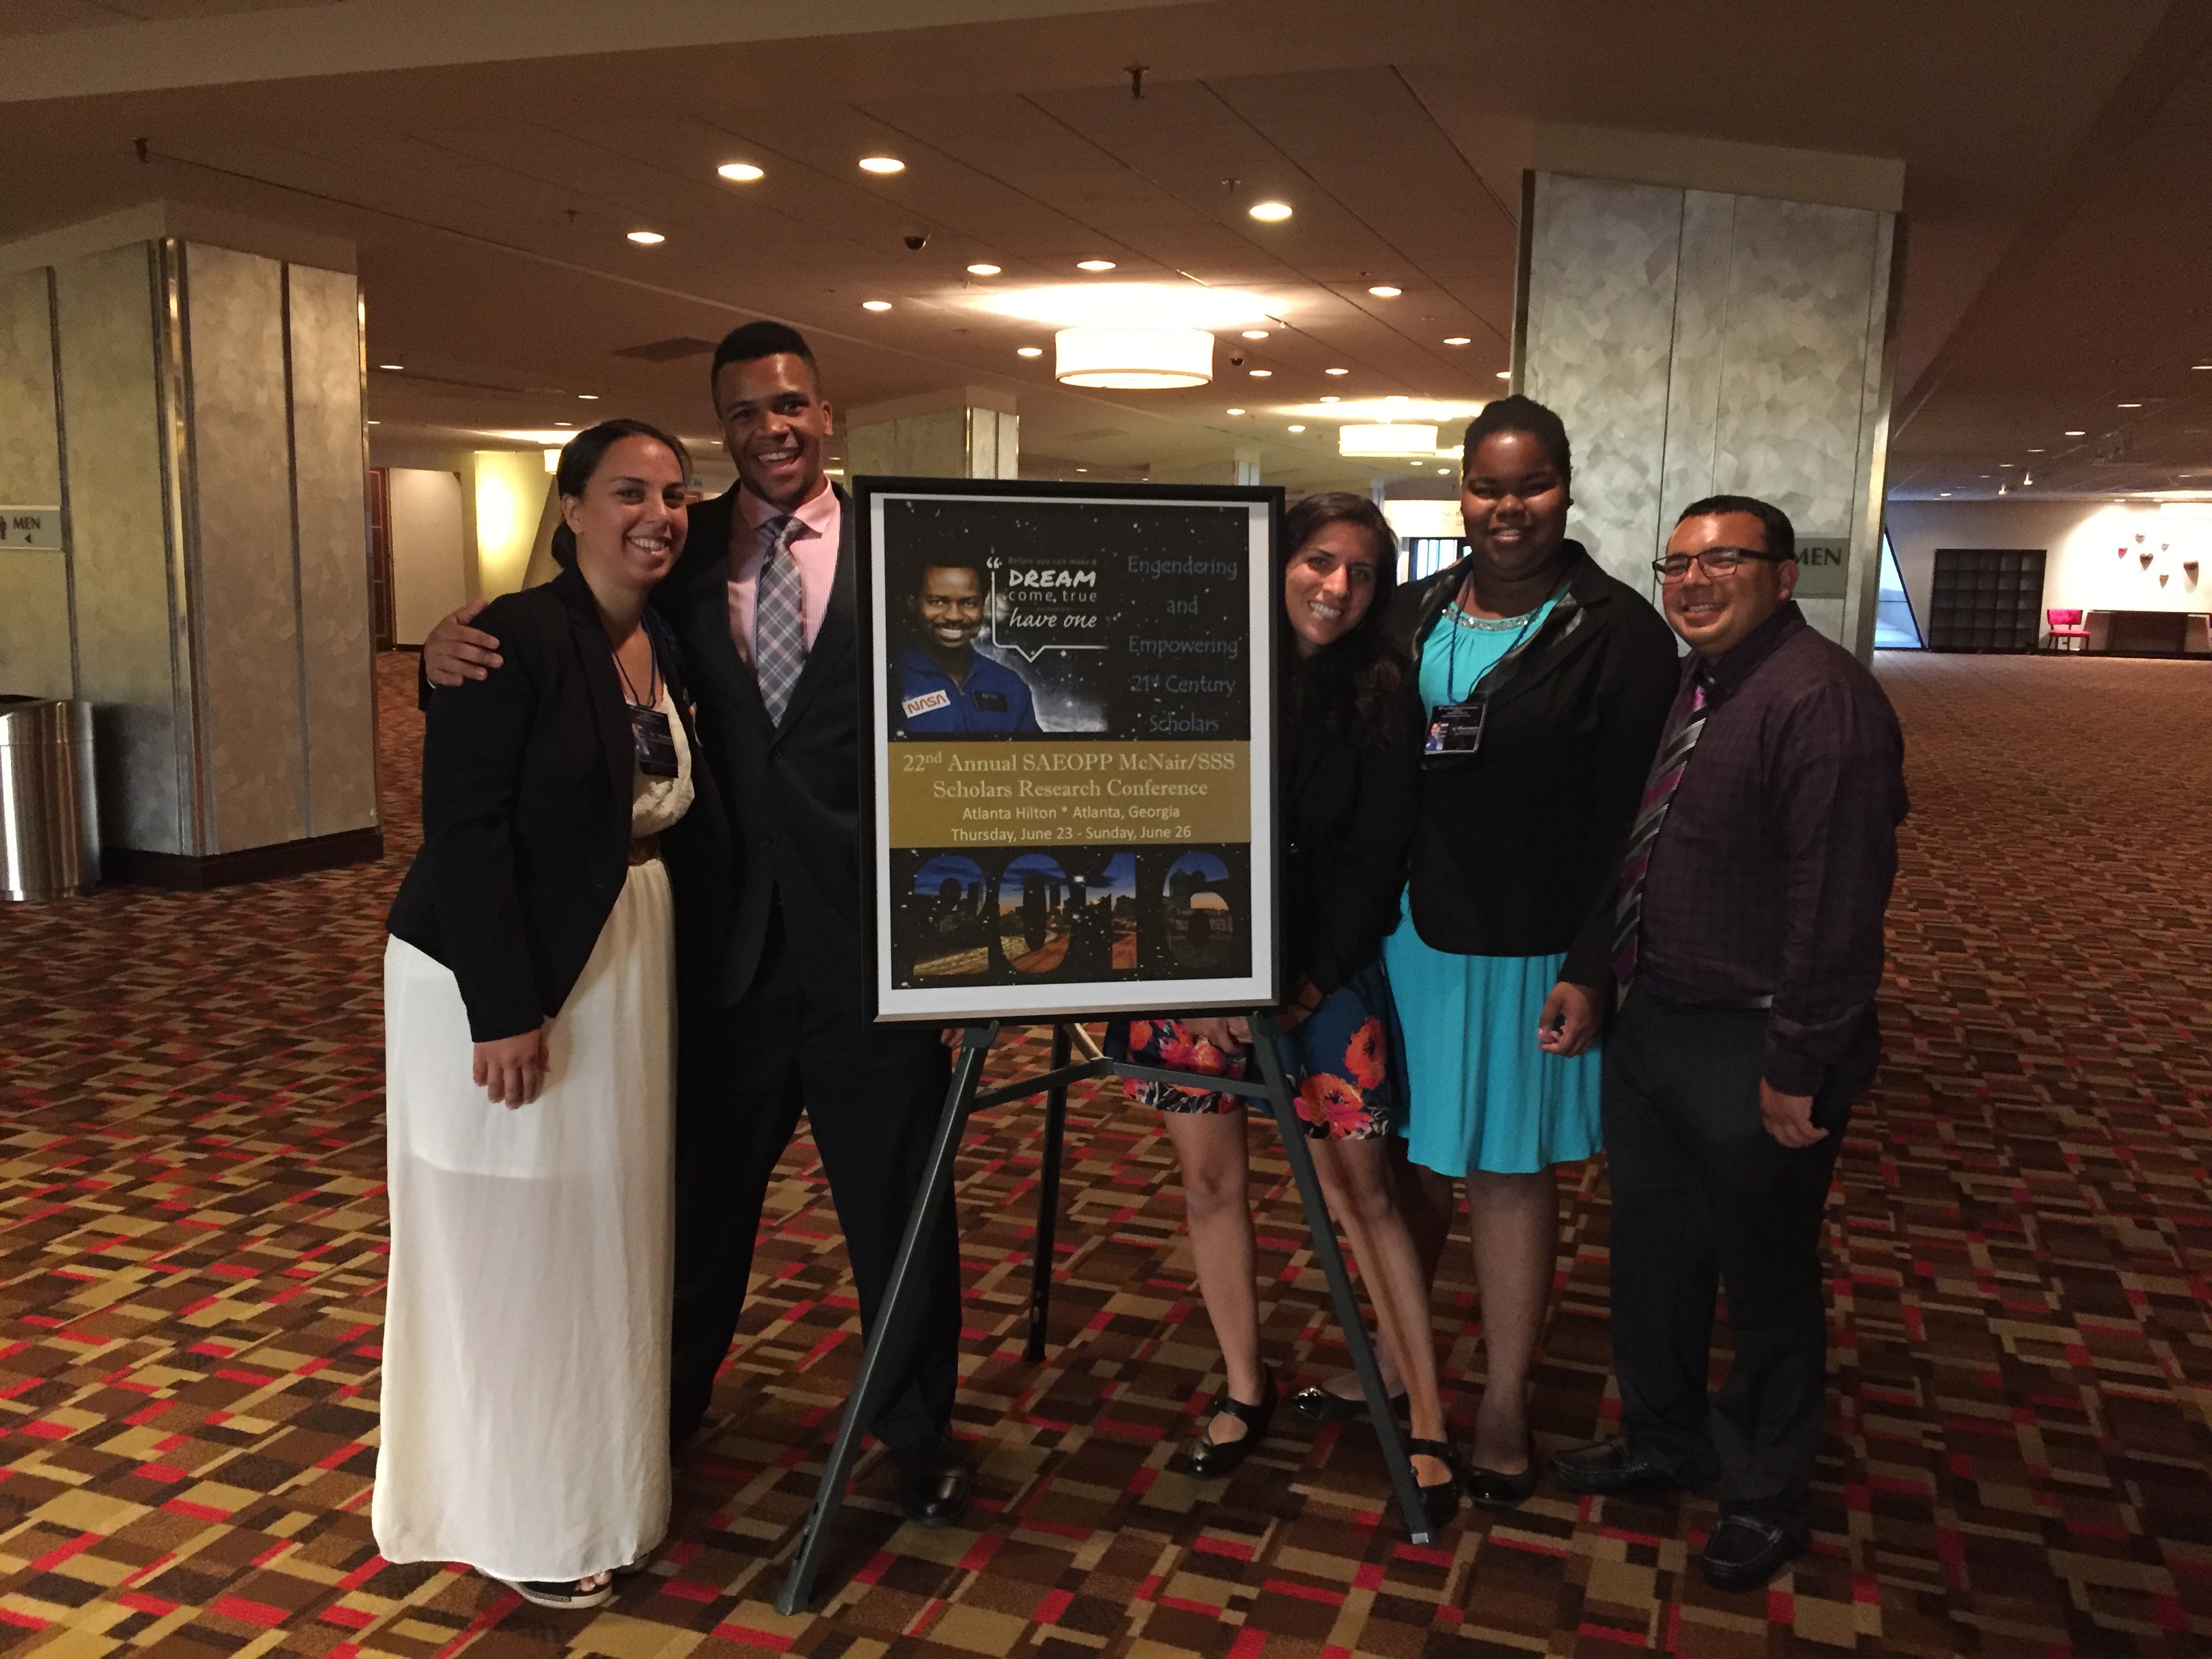 SAEOPP McNair/SSS Scholars Research Conference student attendees photo